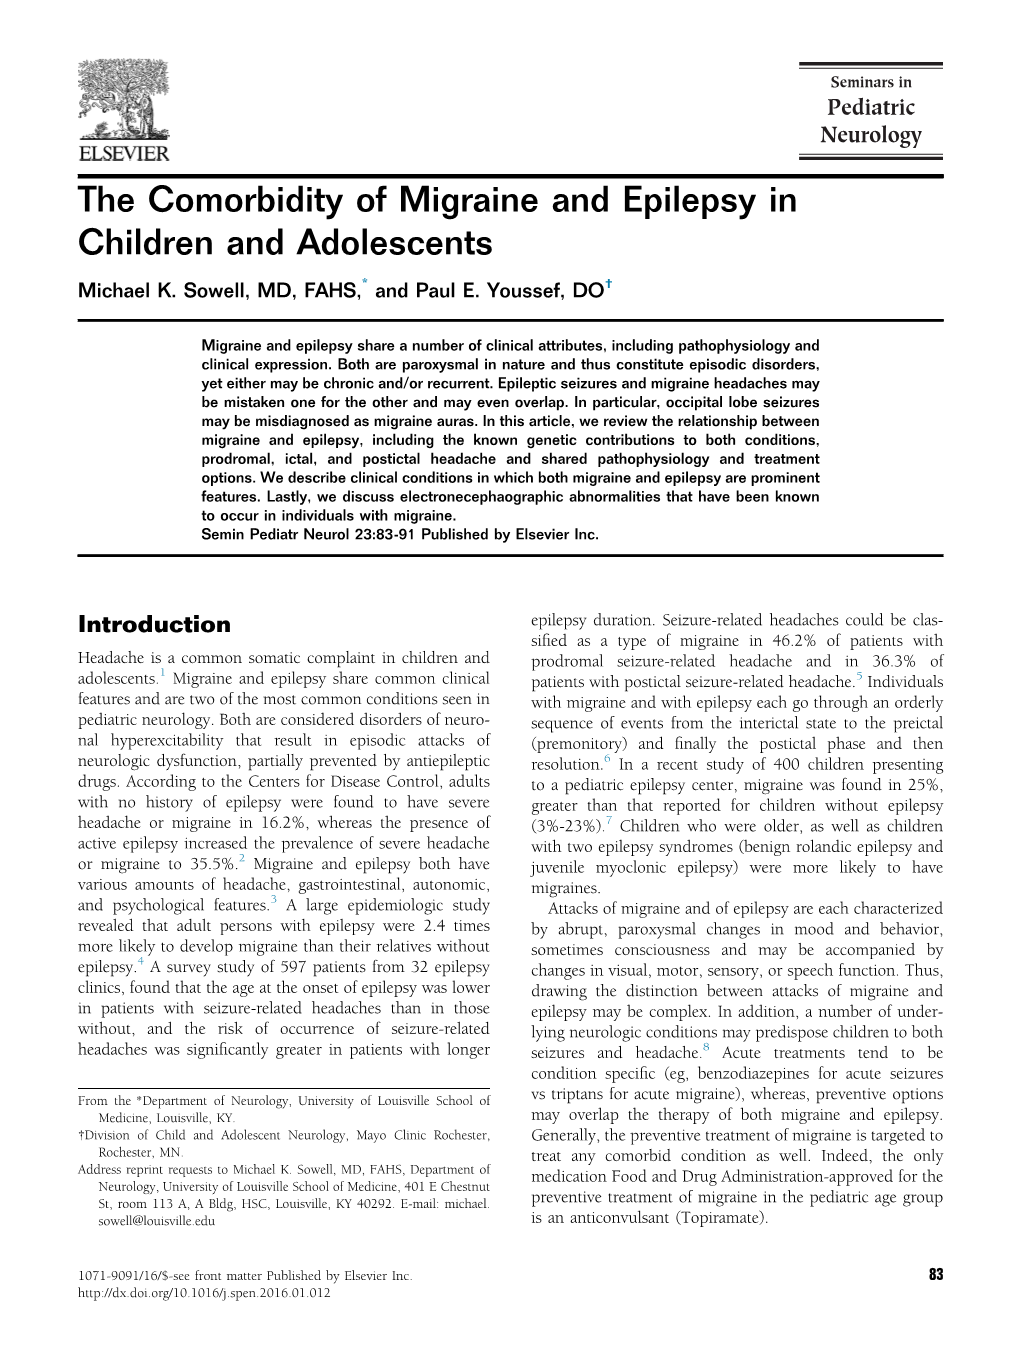 The Comorbidity of Migraine and Epilepsy in Children and Adolescents Michael K